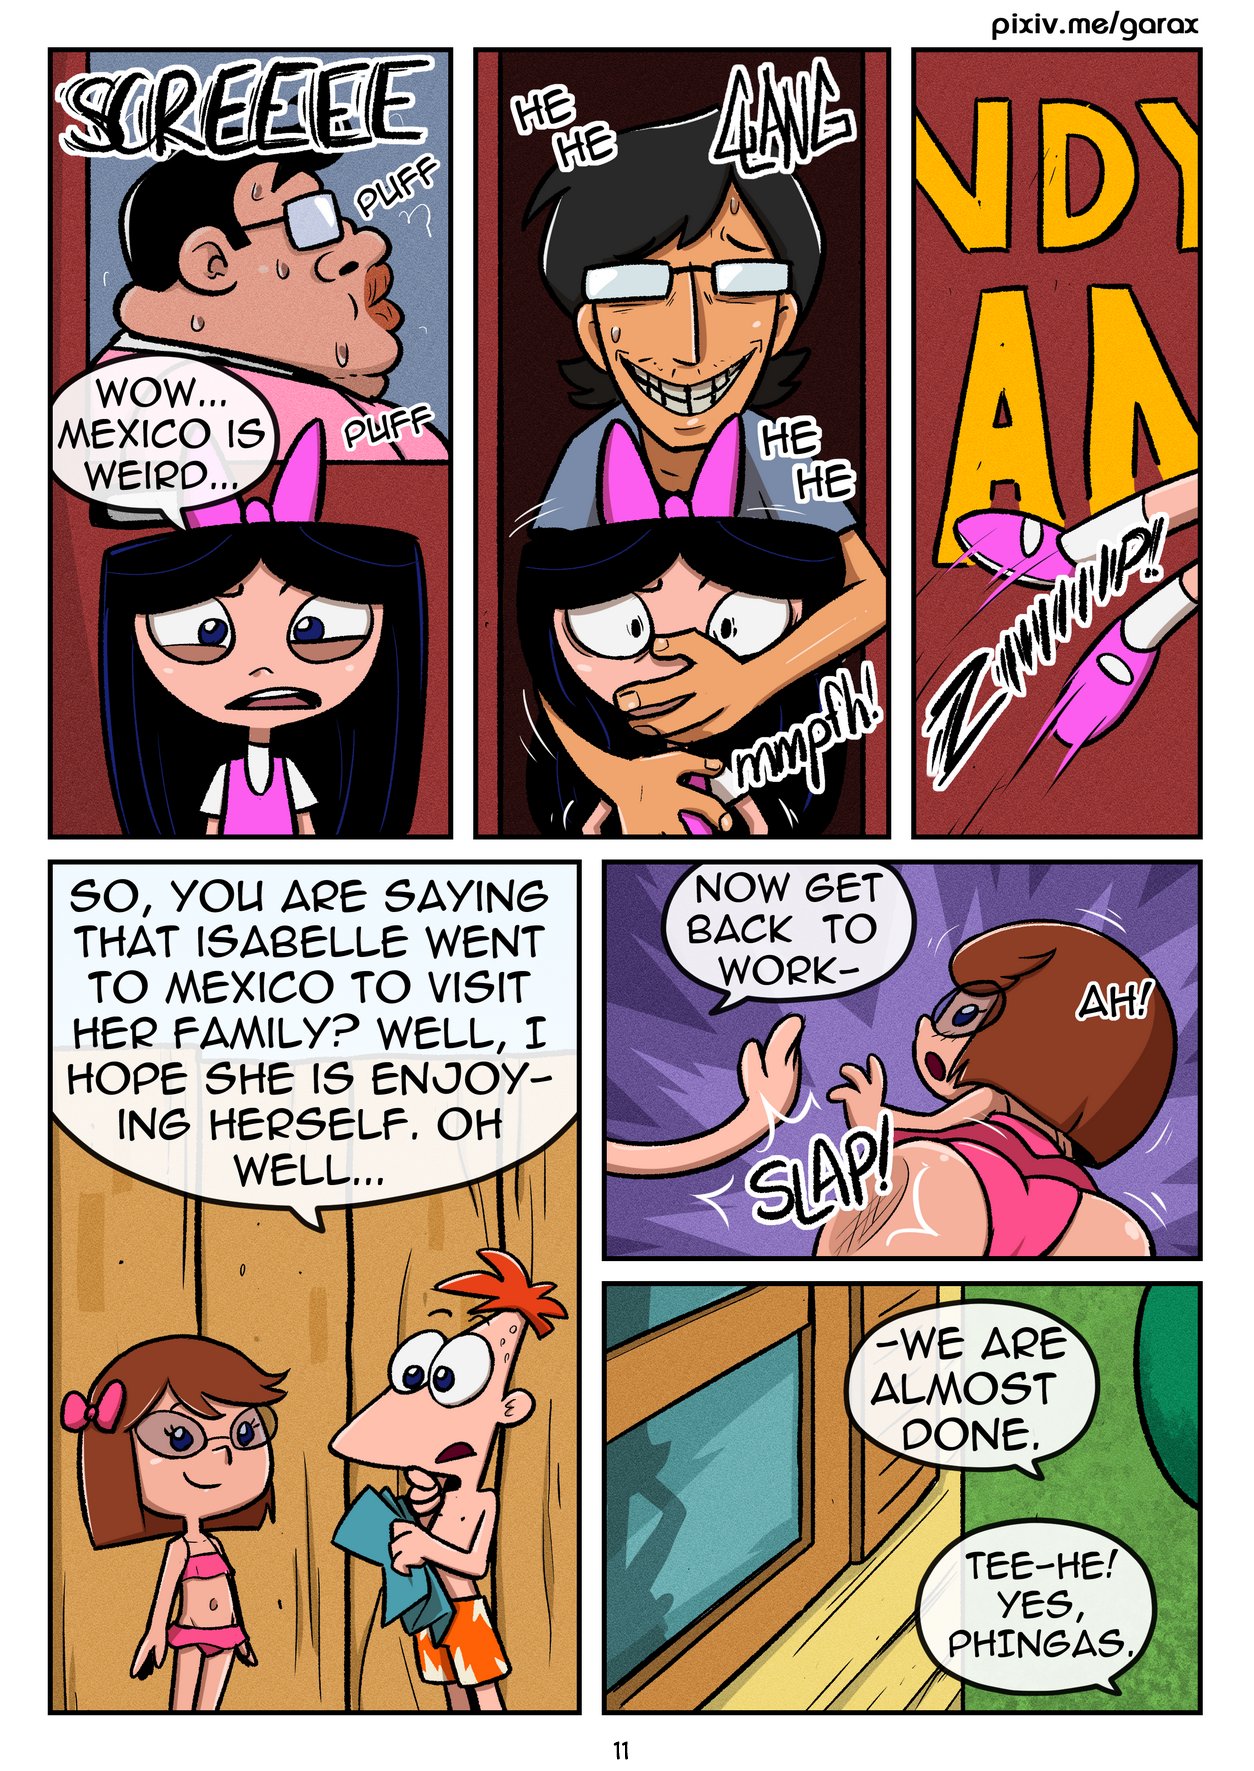 Phineas And Ferb Porn Blowjob - Nudist Beach - Phineas and Ferb by Garax - FreeAdultComix